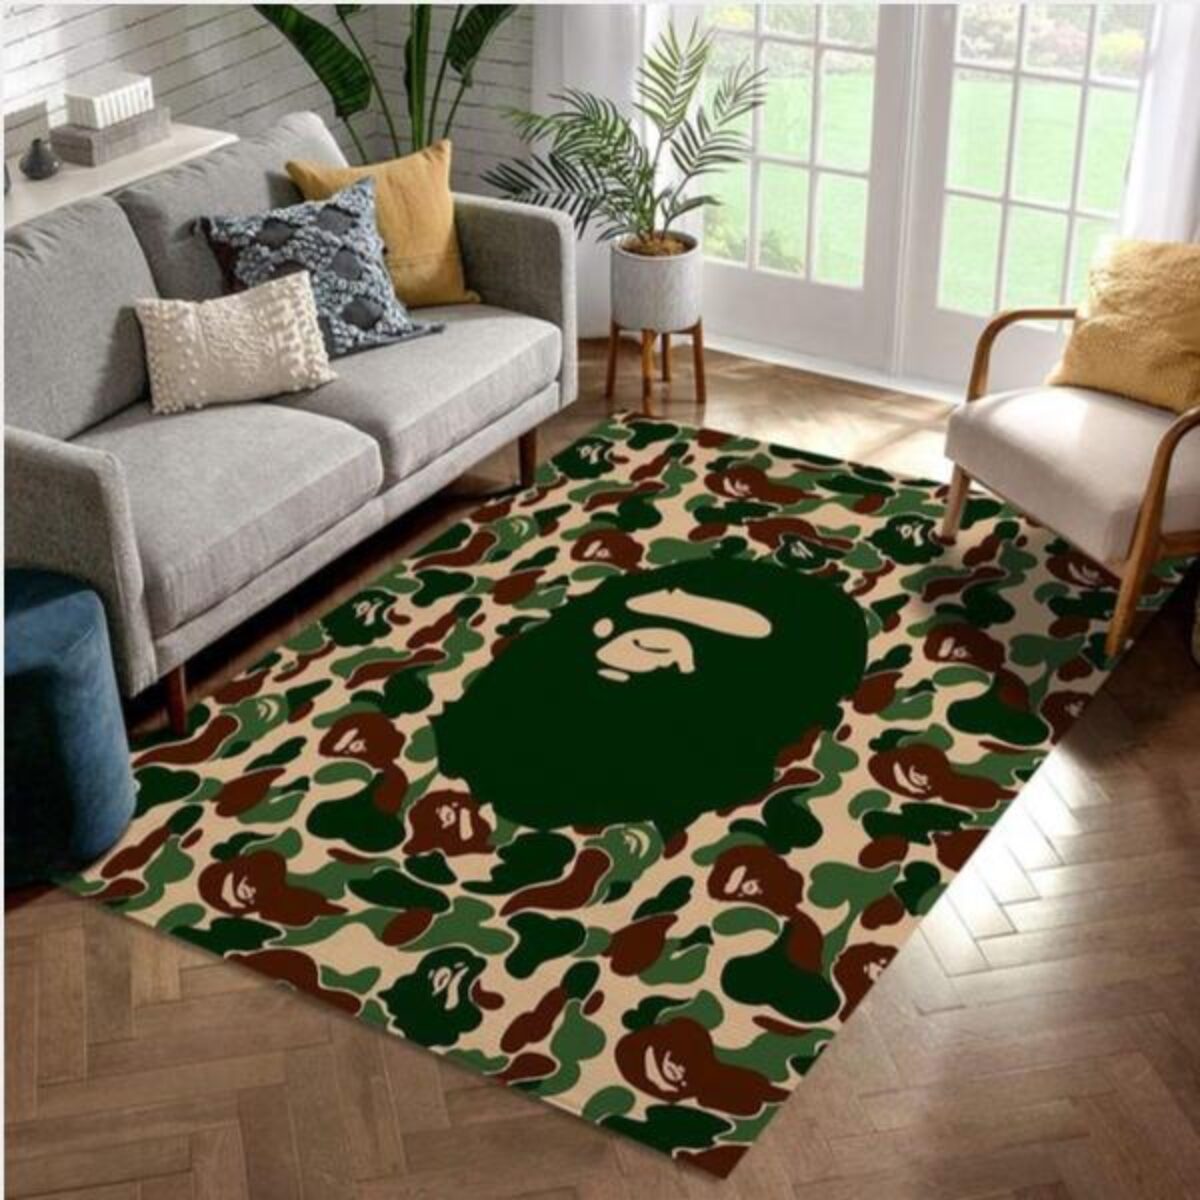 Louis Vuitton Area Rug Colorful Hypebeast Fashion Brand Living